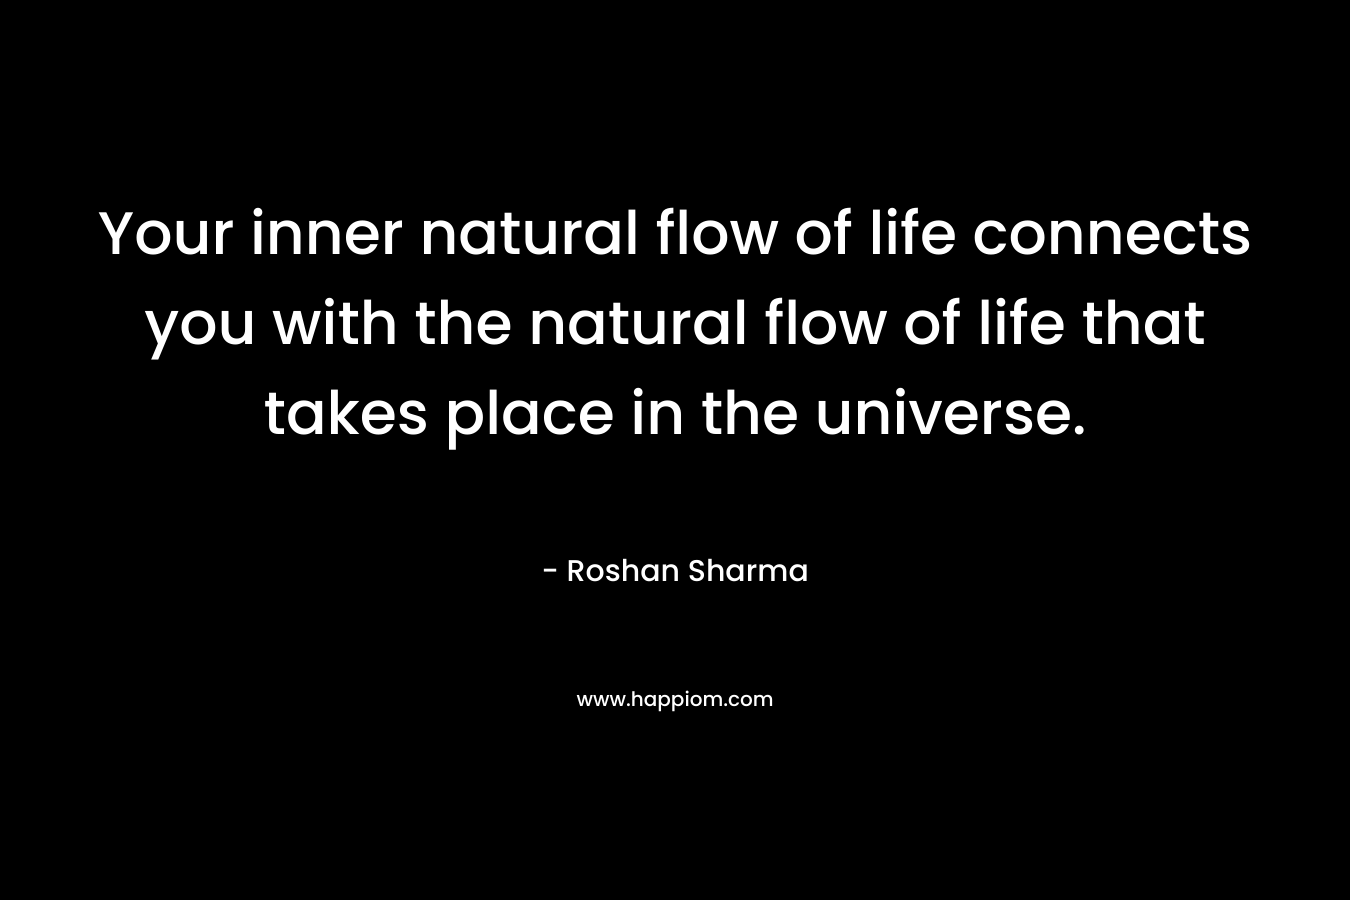 Your inner natural flow of life connects you with the natural flow of life that takes place in the universe. – Roshan Sharma